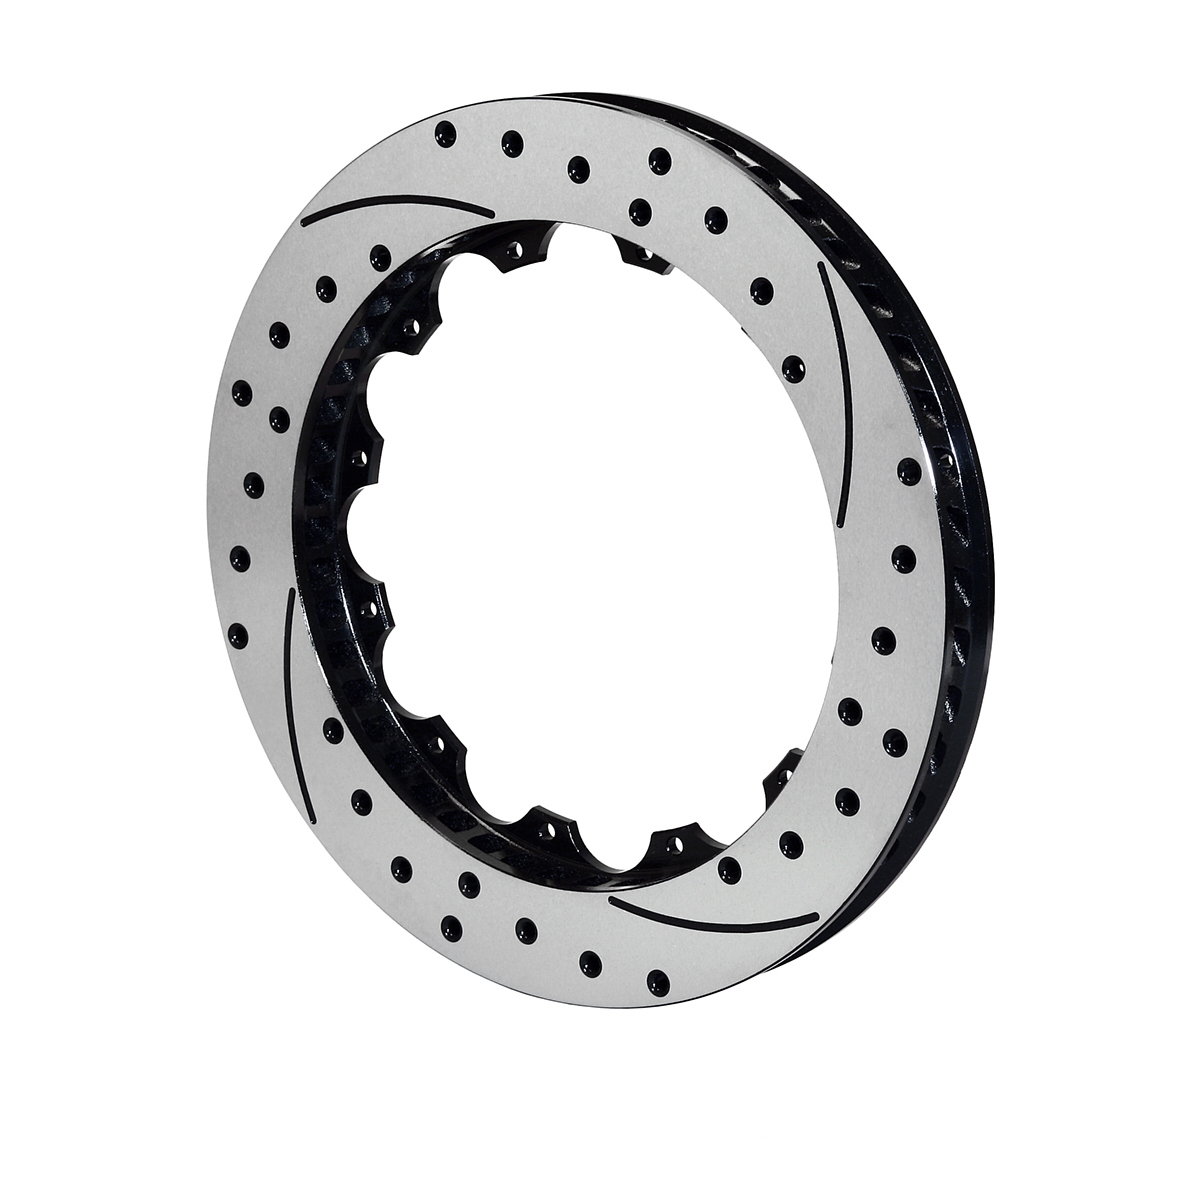 Wilwood 160-7798-BK Brake Rotor, SRP, Passenger Side, Drilled / Slotted, 13.06 in OD, 1.25 in Thick, 12 x 8.75 in Bolt Pattern, Iron, Black Paint, Each